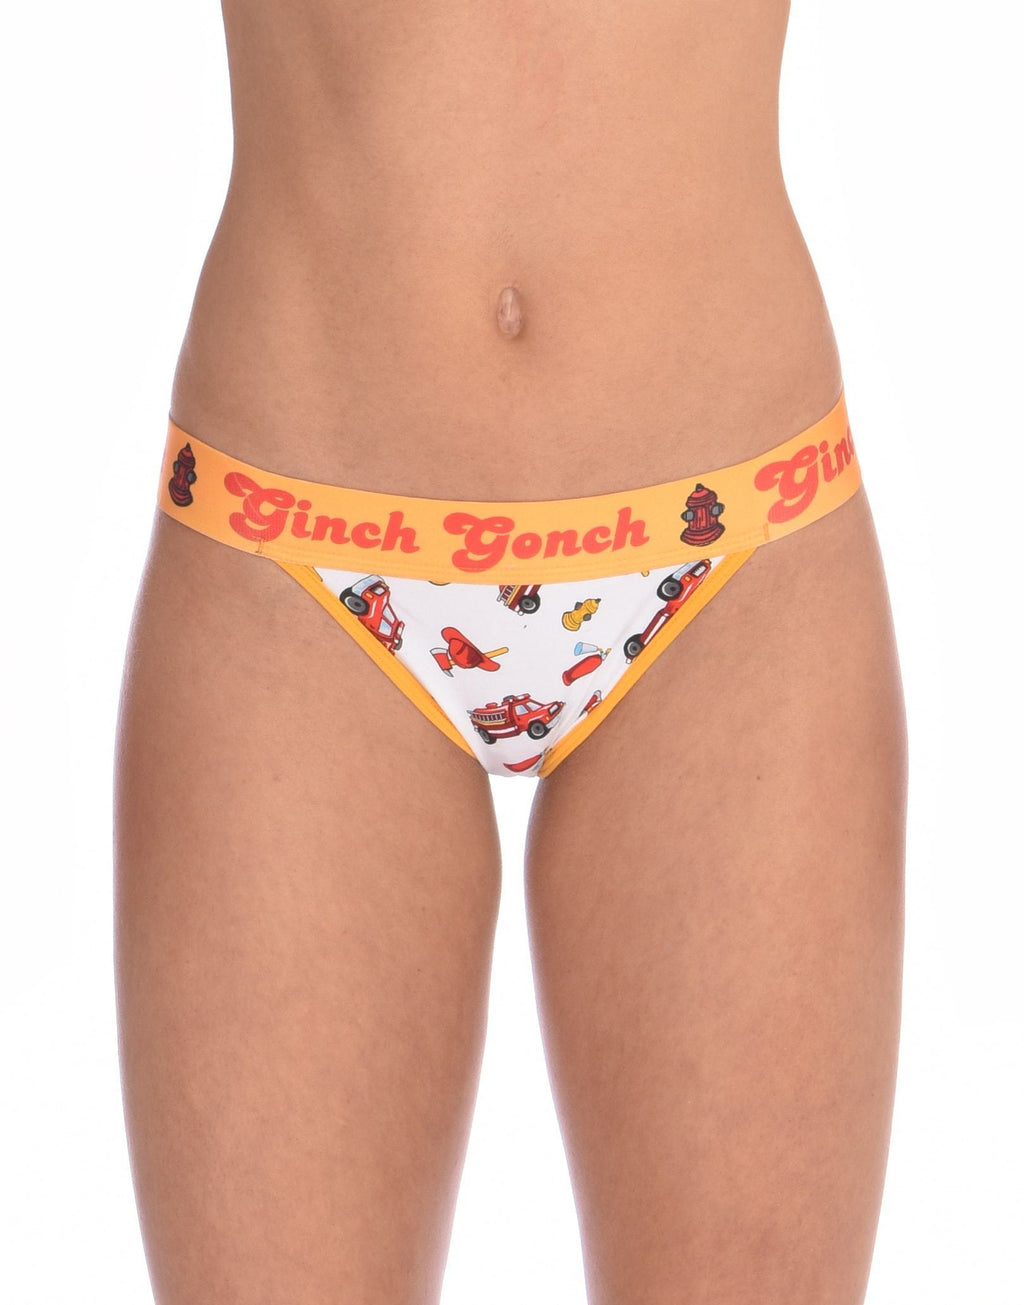 Ginch Gonch GG Fire Fighters thong women's underwear y front white fabric with fire engines hats and hydrants, yellow trim and printed yellow waistband front